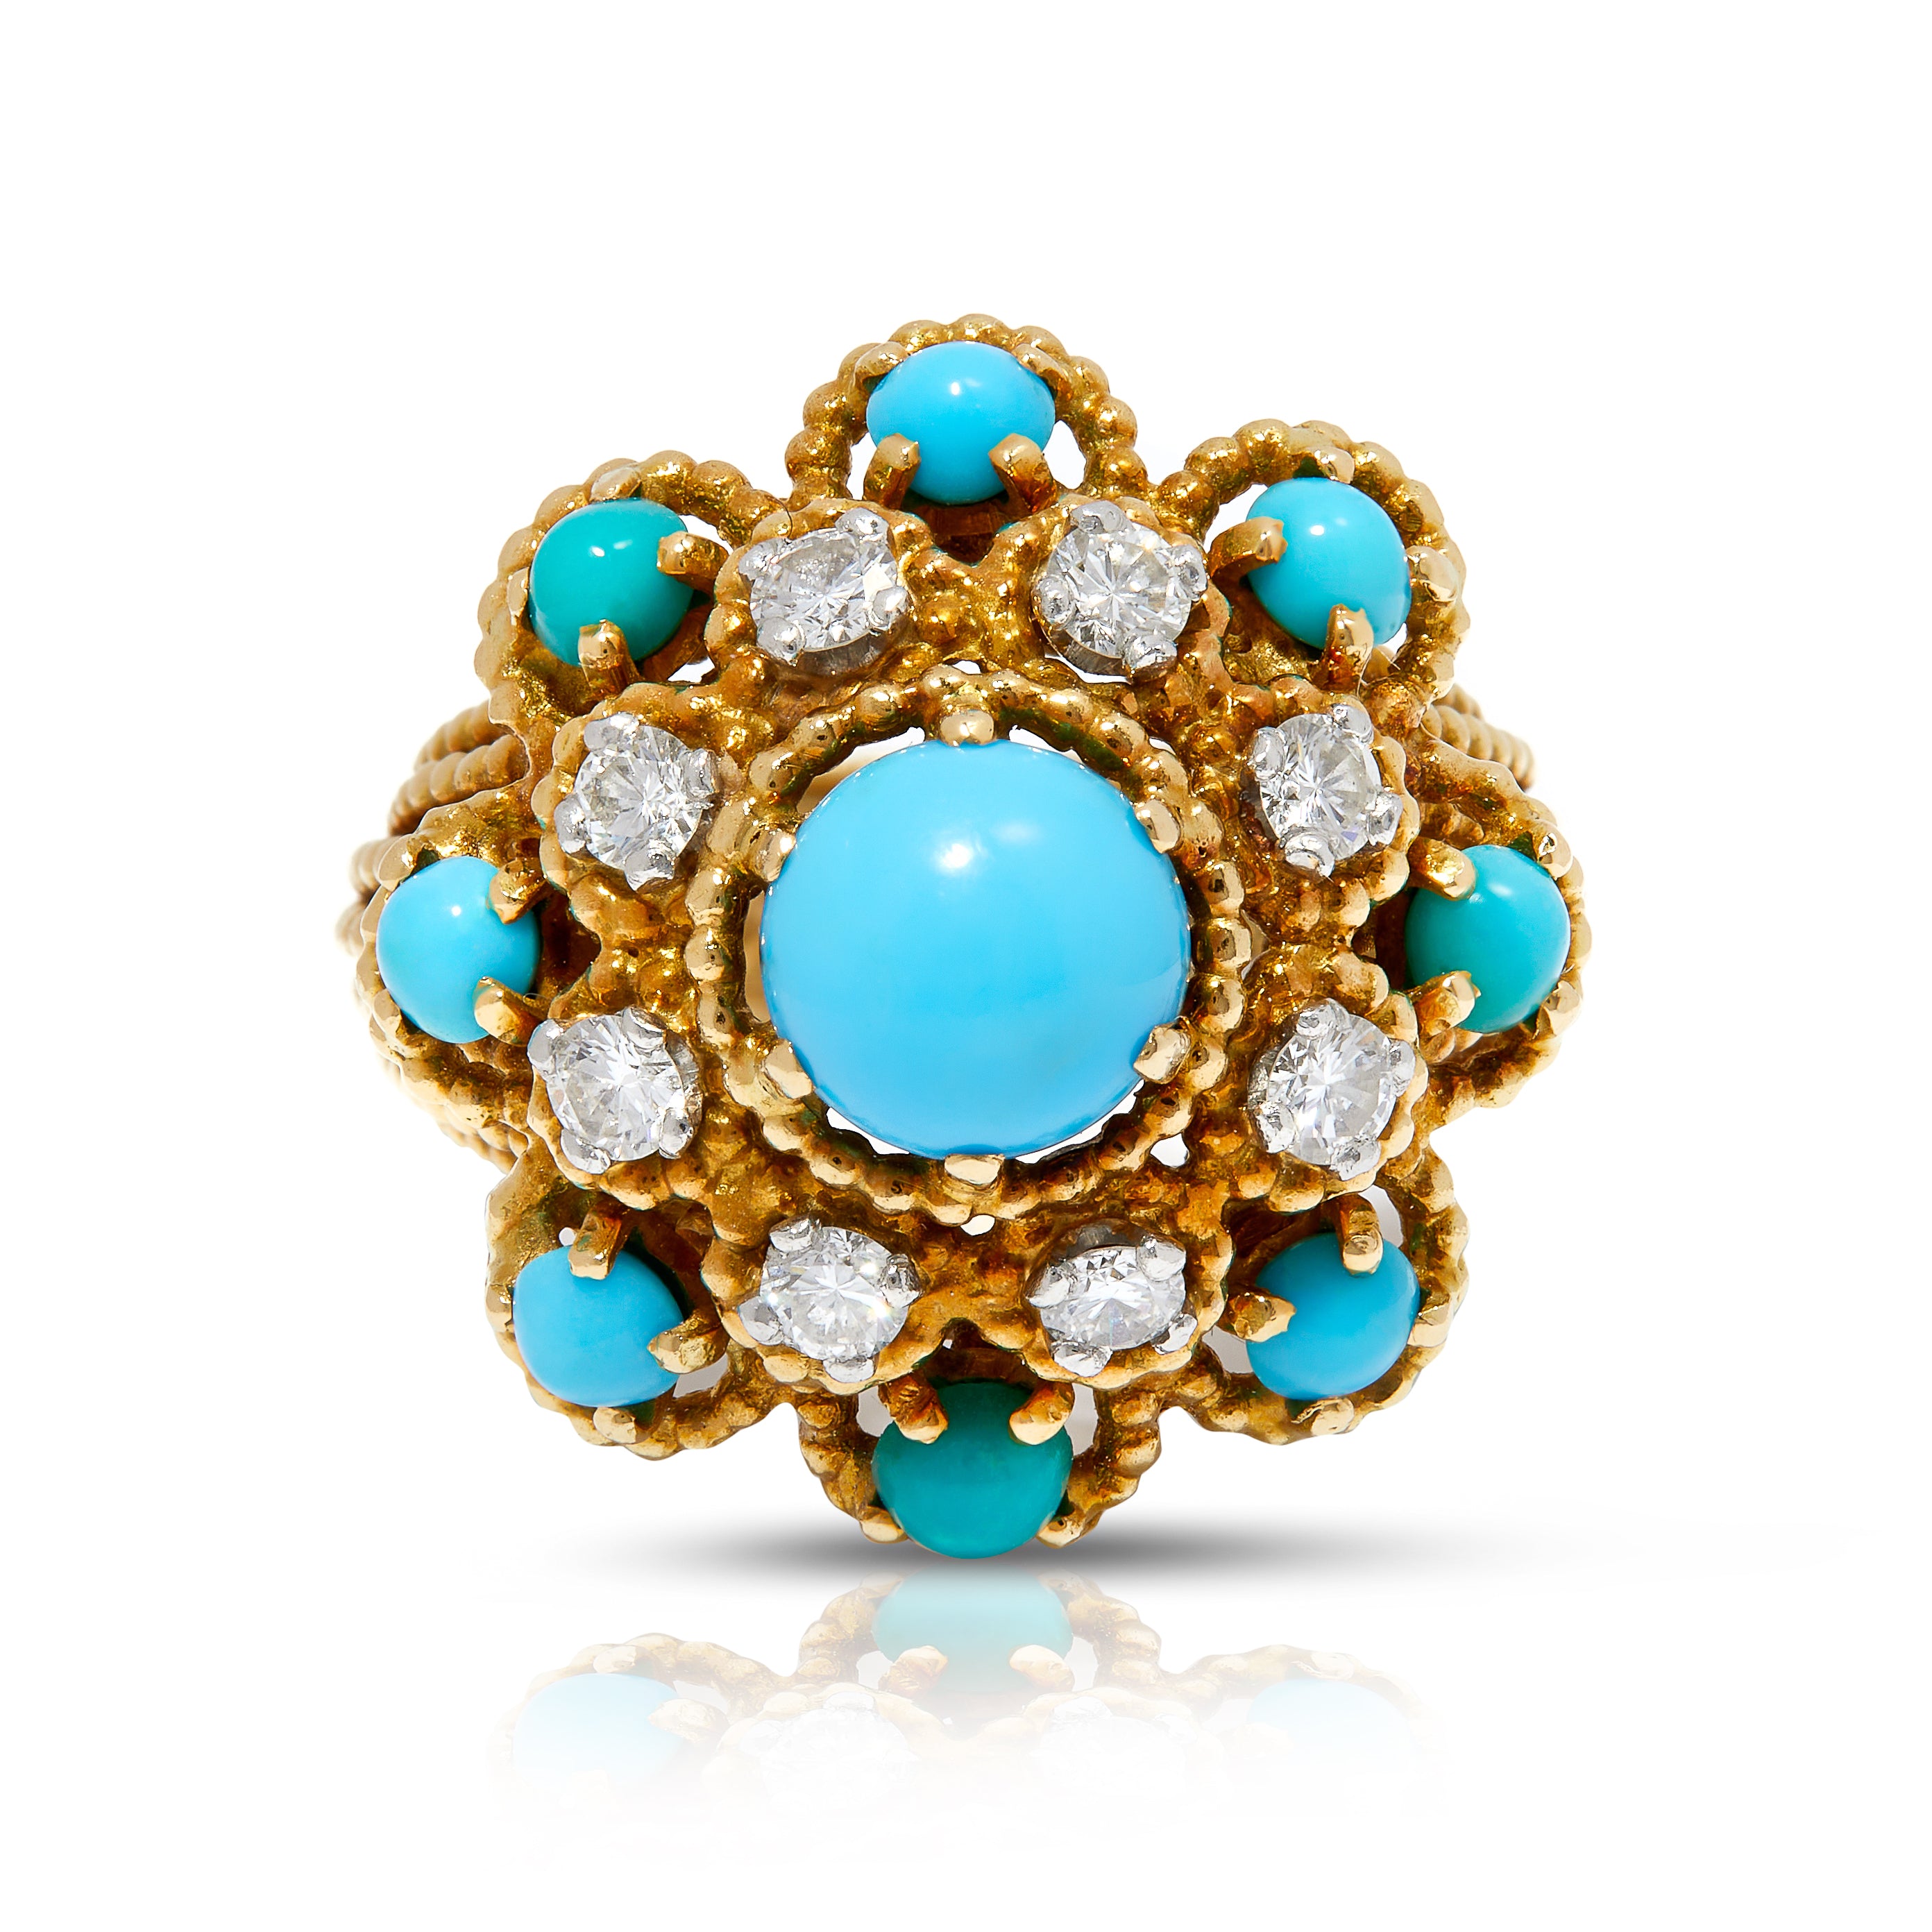 18ct gold dress ring with turquoise and diamonds.